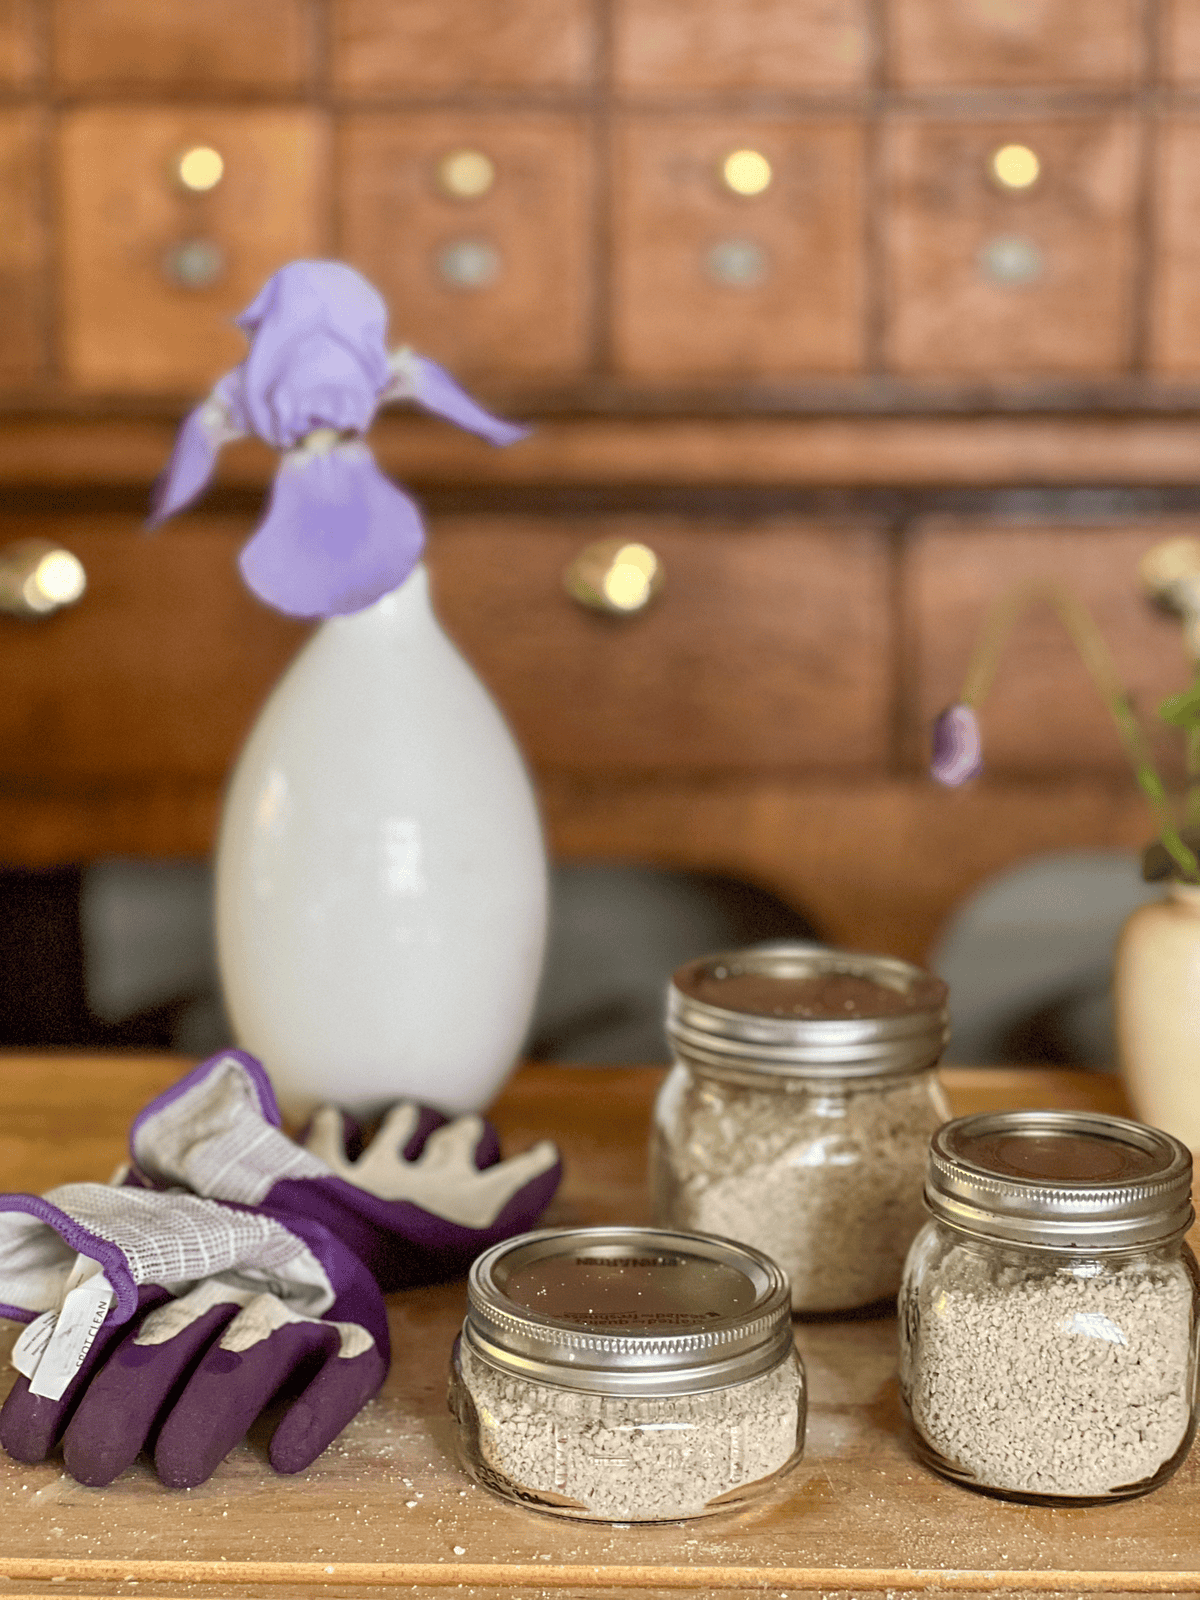 3 mason jars filled with homemade garden scrub for hands on a wood cutting board with purple gardening gloves.